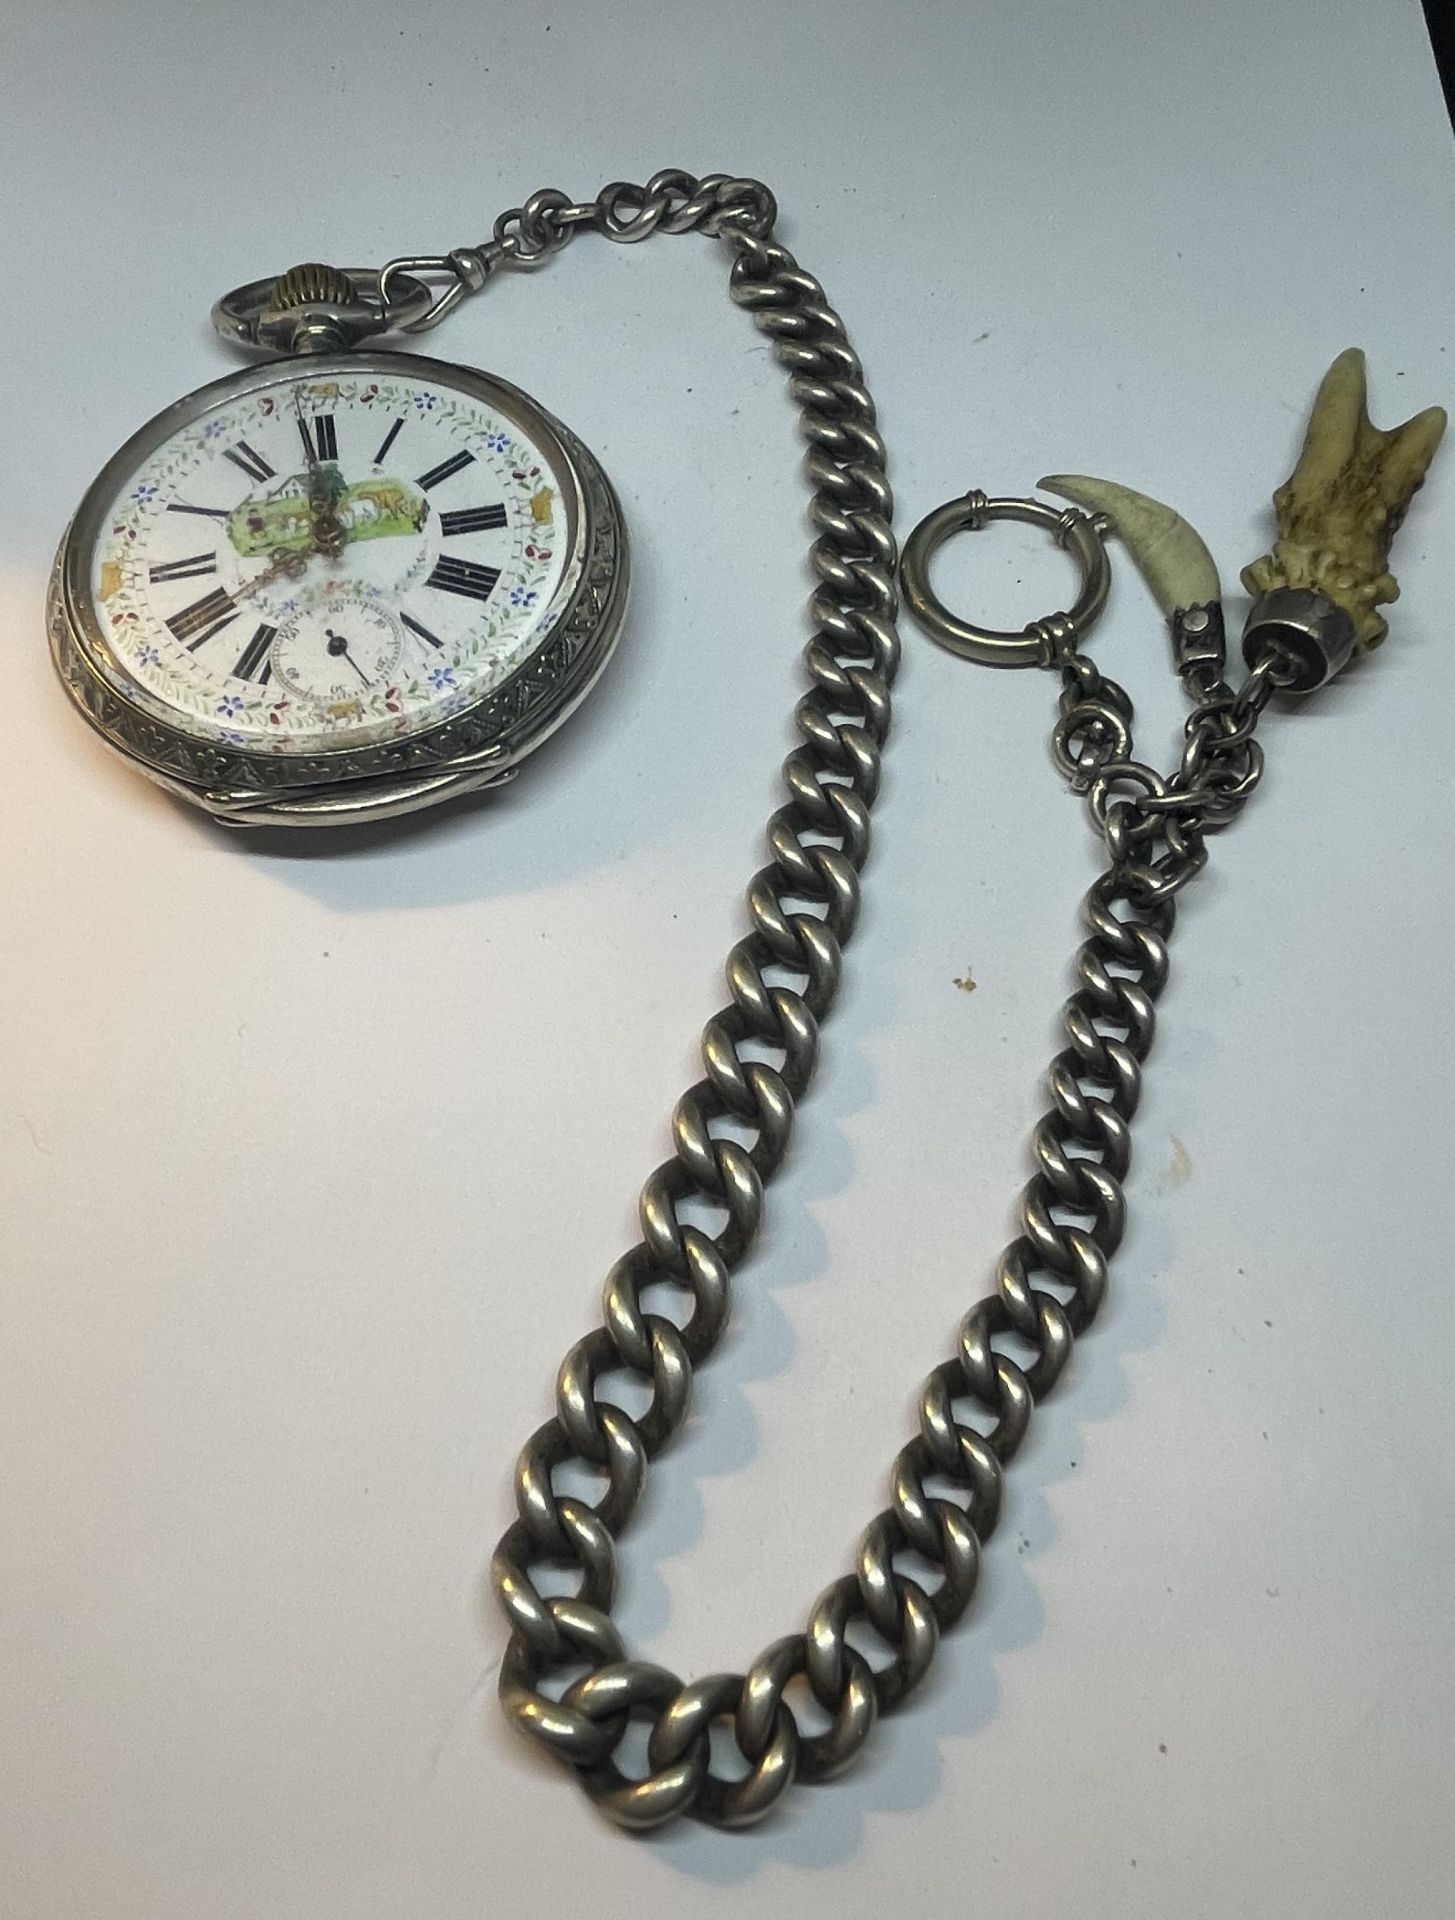 AN ANTIQUE .800 SILVER GOLIATH POCKET WATCH WITH A .830 SILVER CHAIN, SEEN WORKING BUT NO WARRANTIES